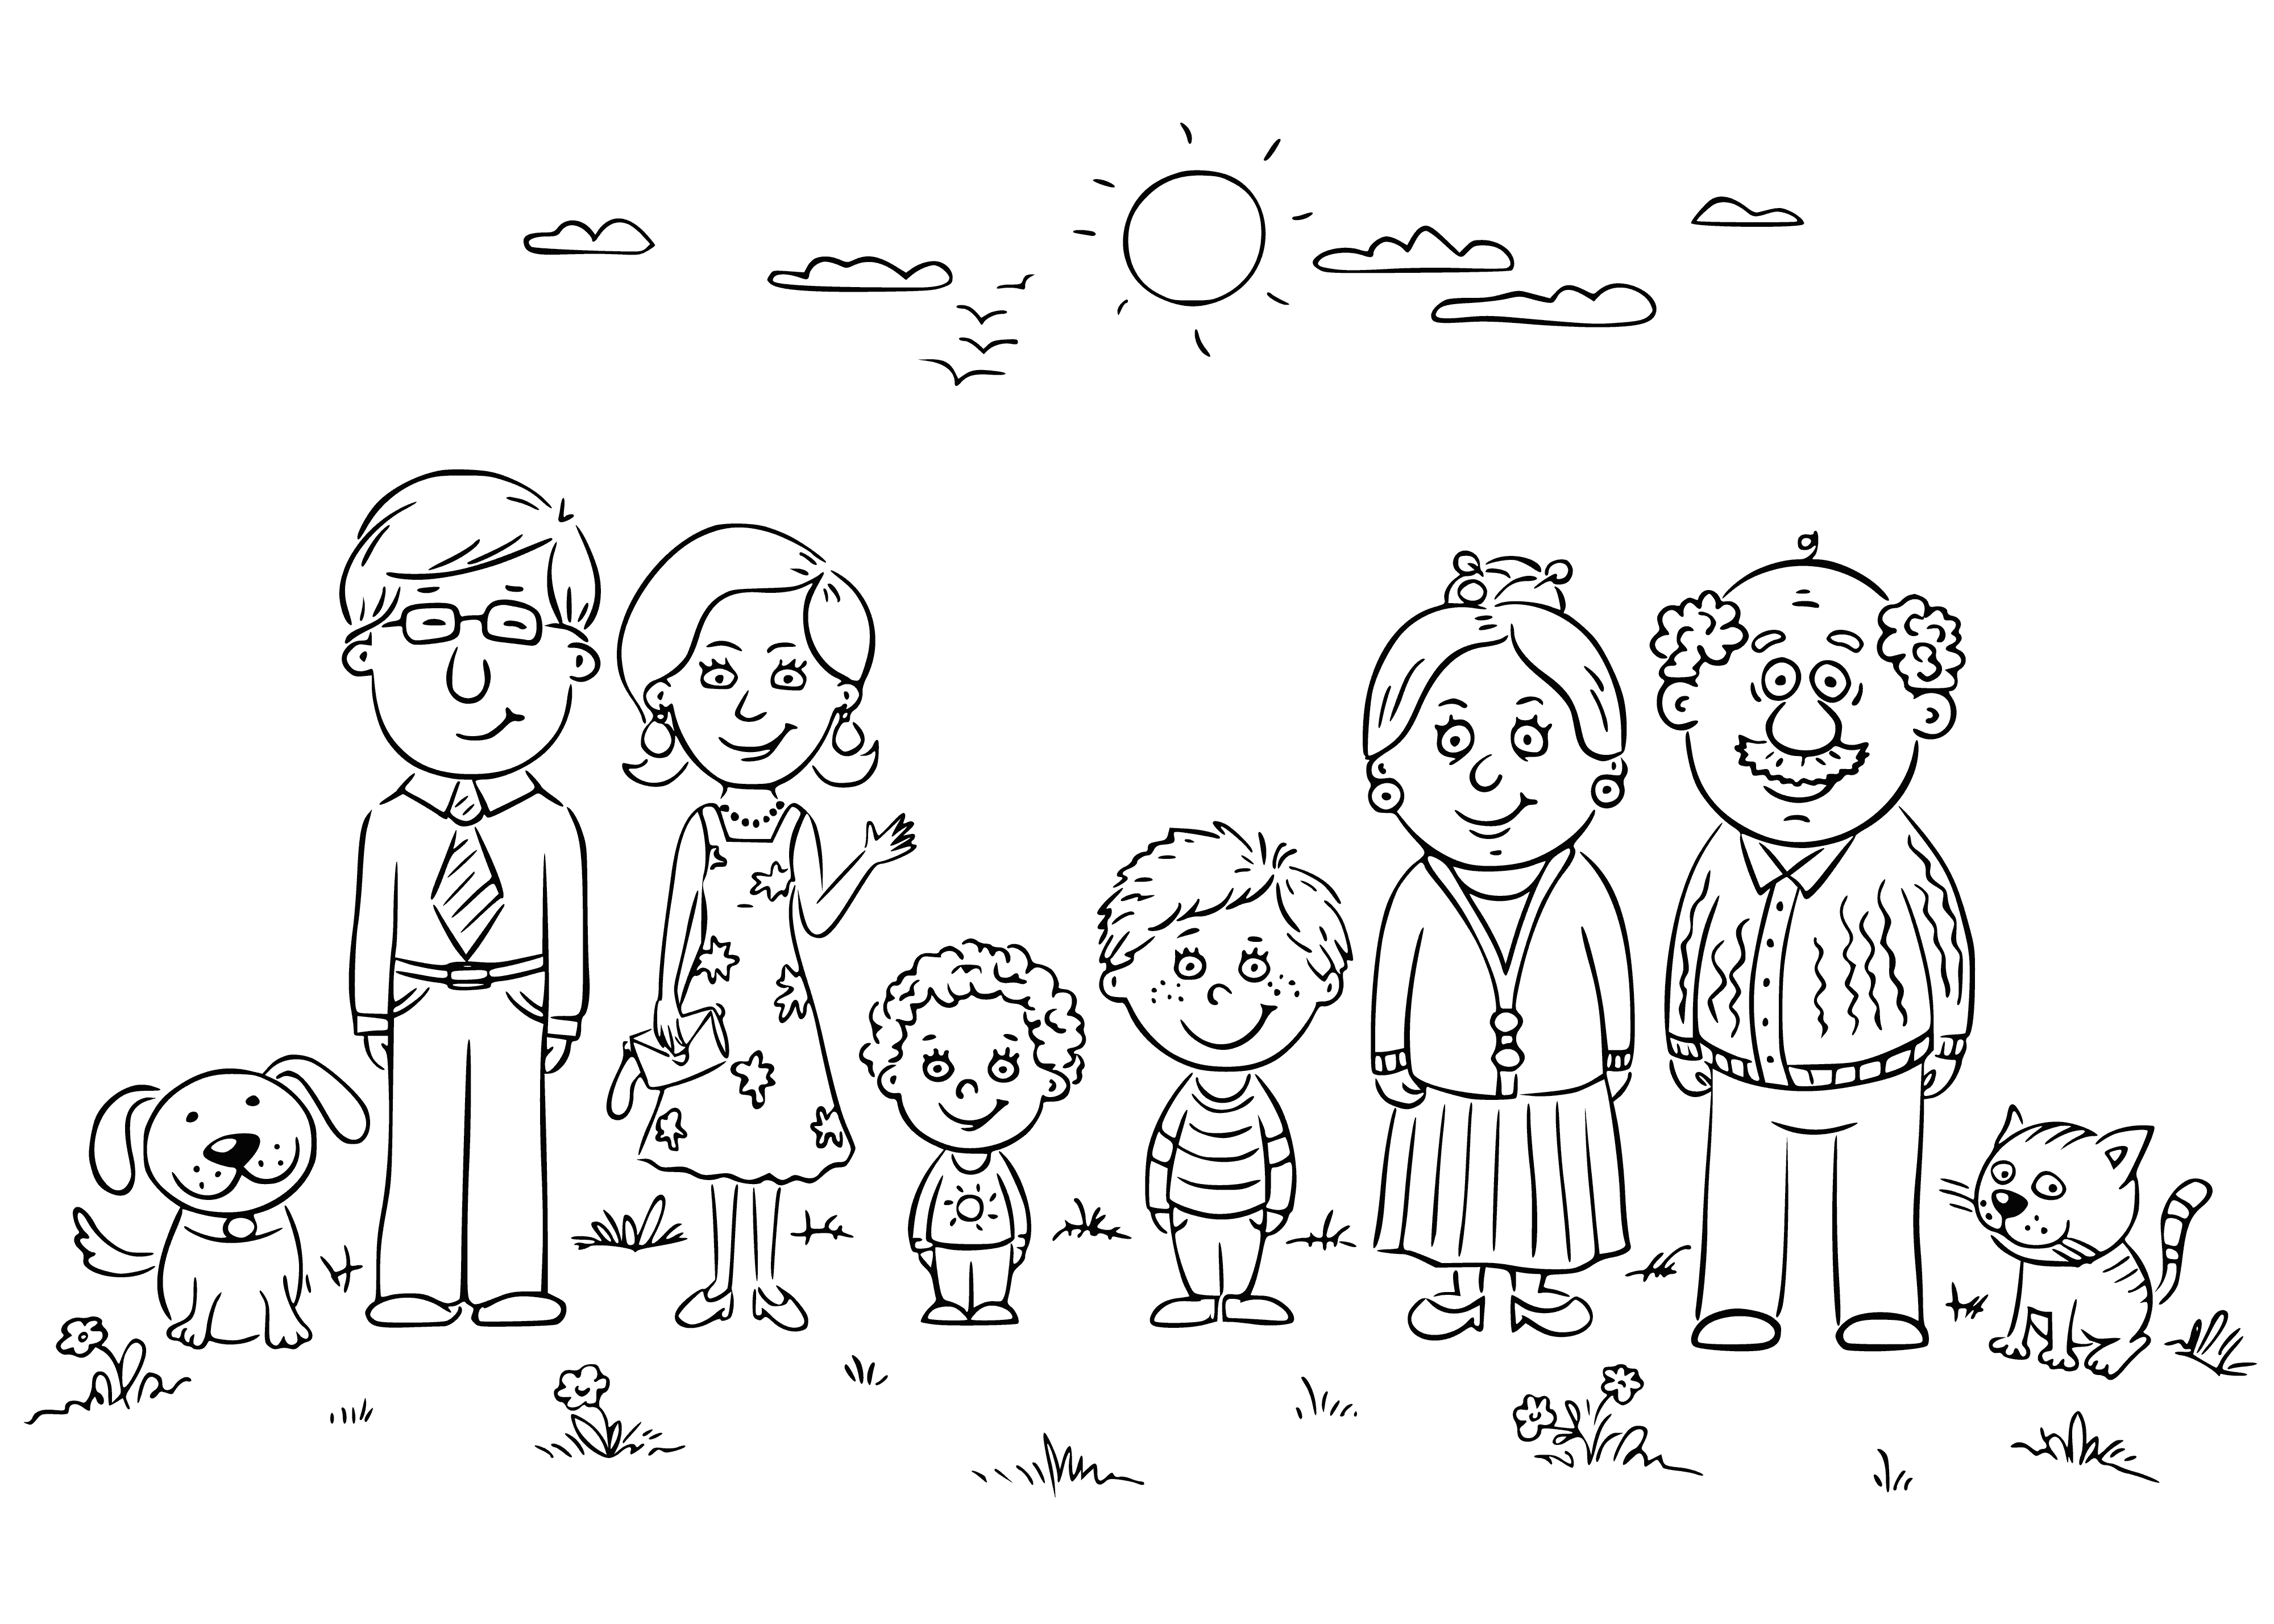 coloring page: Family of 6 sits happily on a blanket in the park: parents together & children in front, smiling & content.